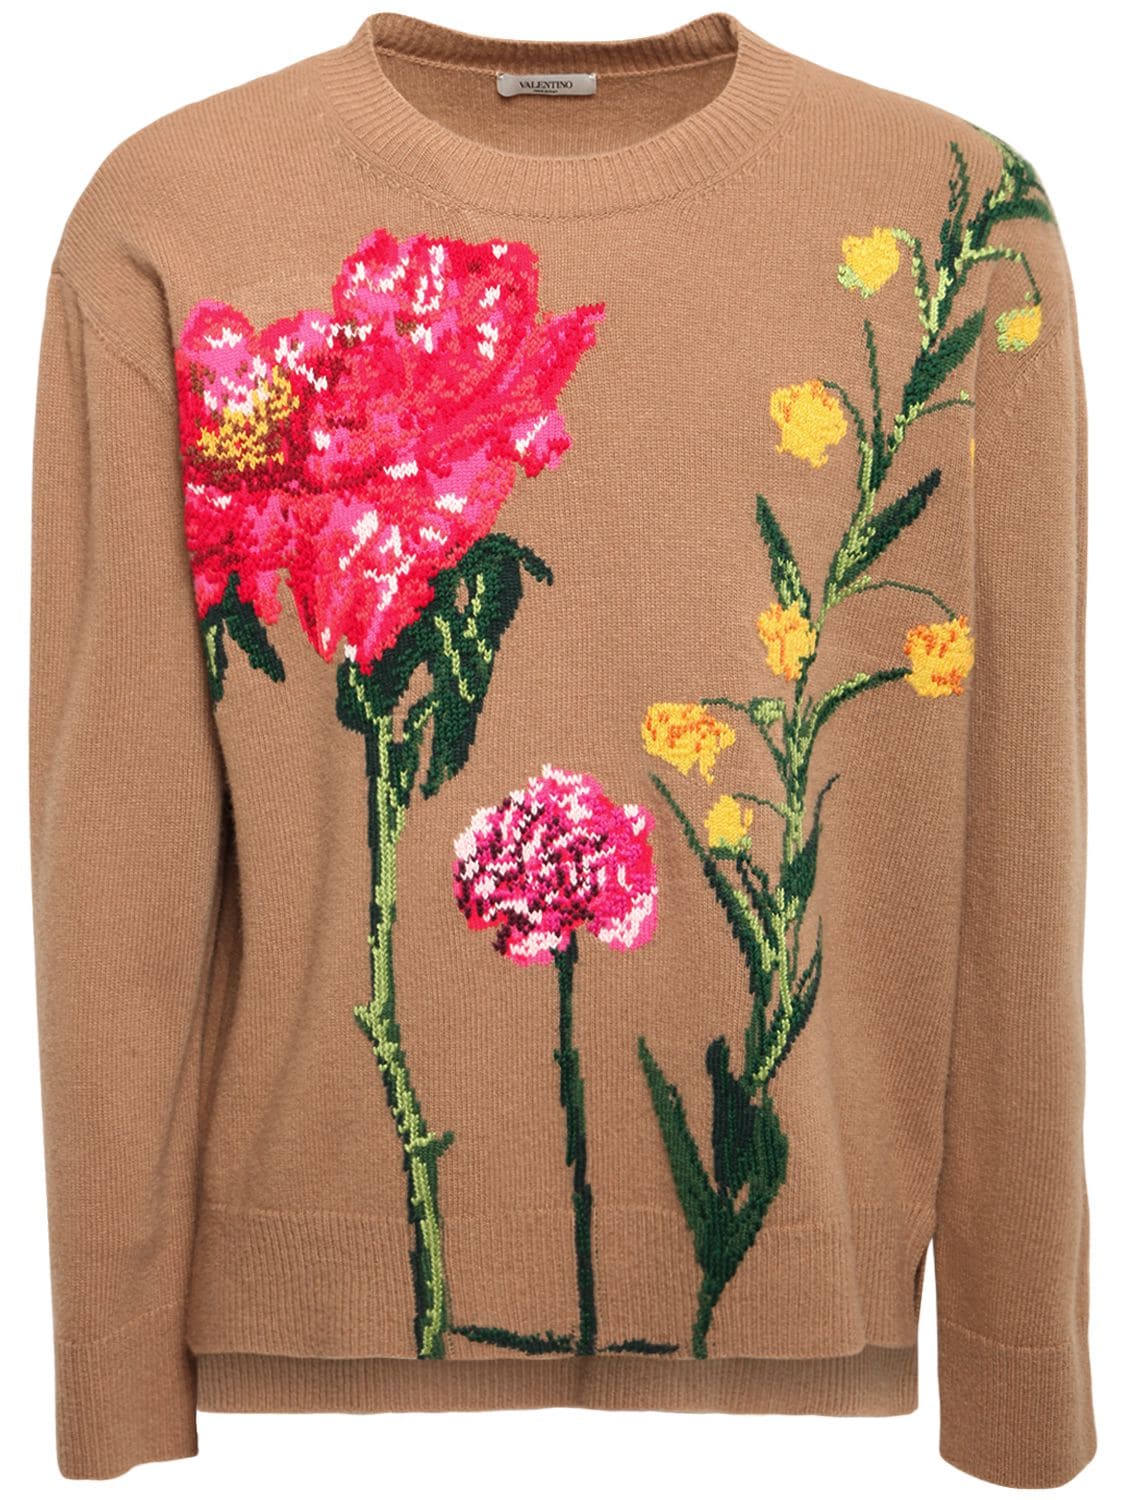 VALENTINO FLORAL WOOL & CASHMERE SWEATER,72I3GS009-MUGW0